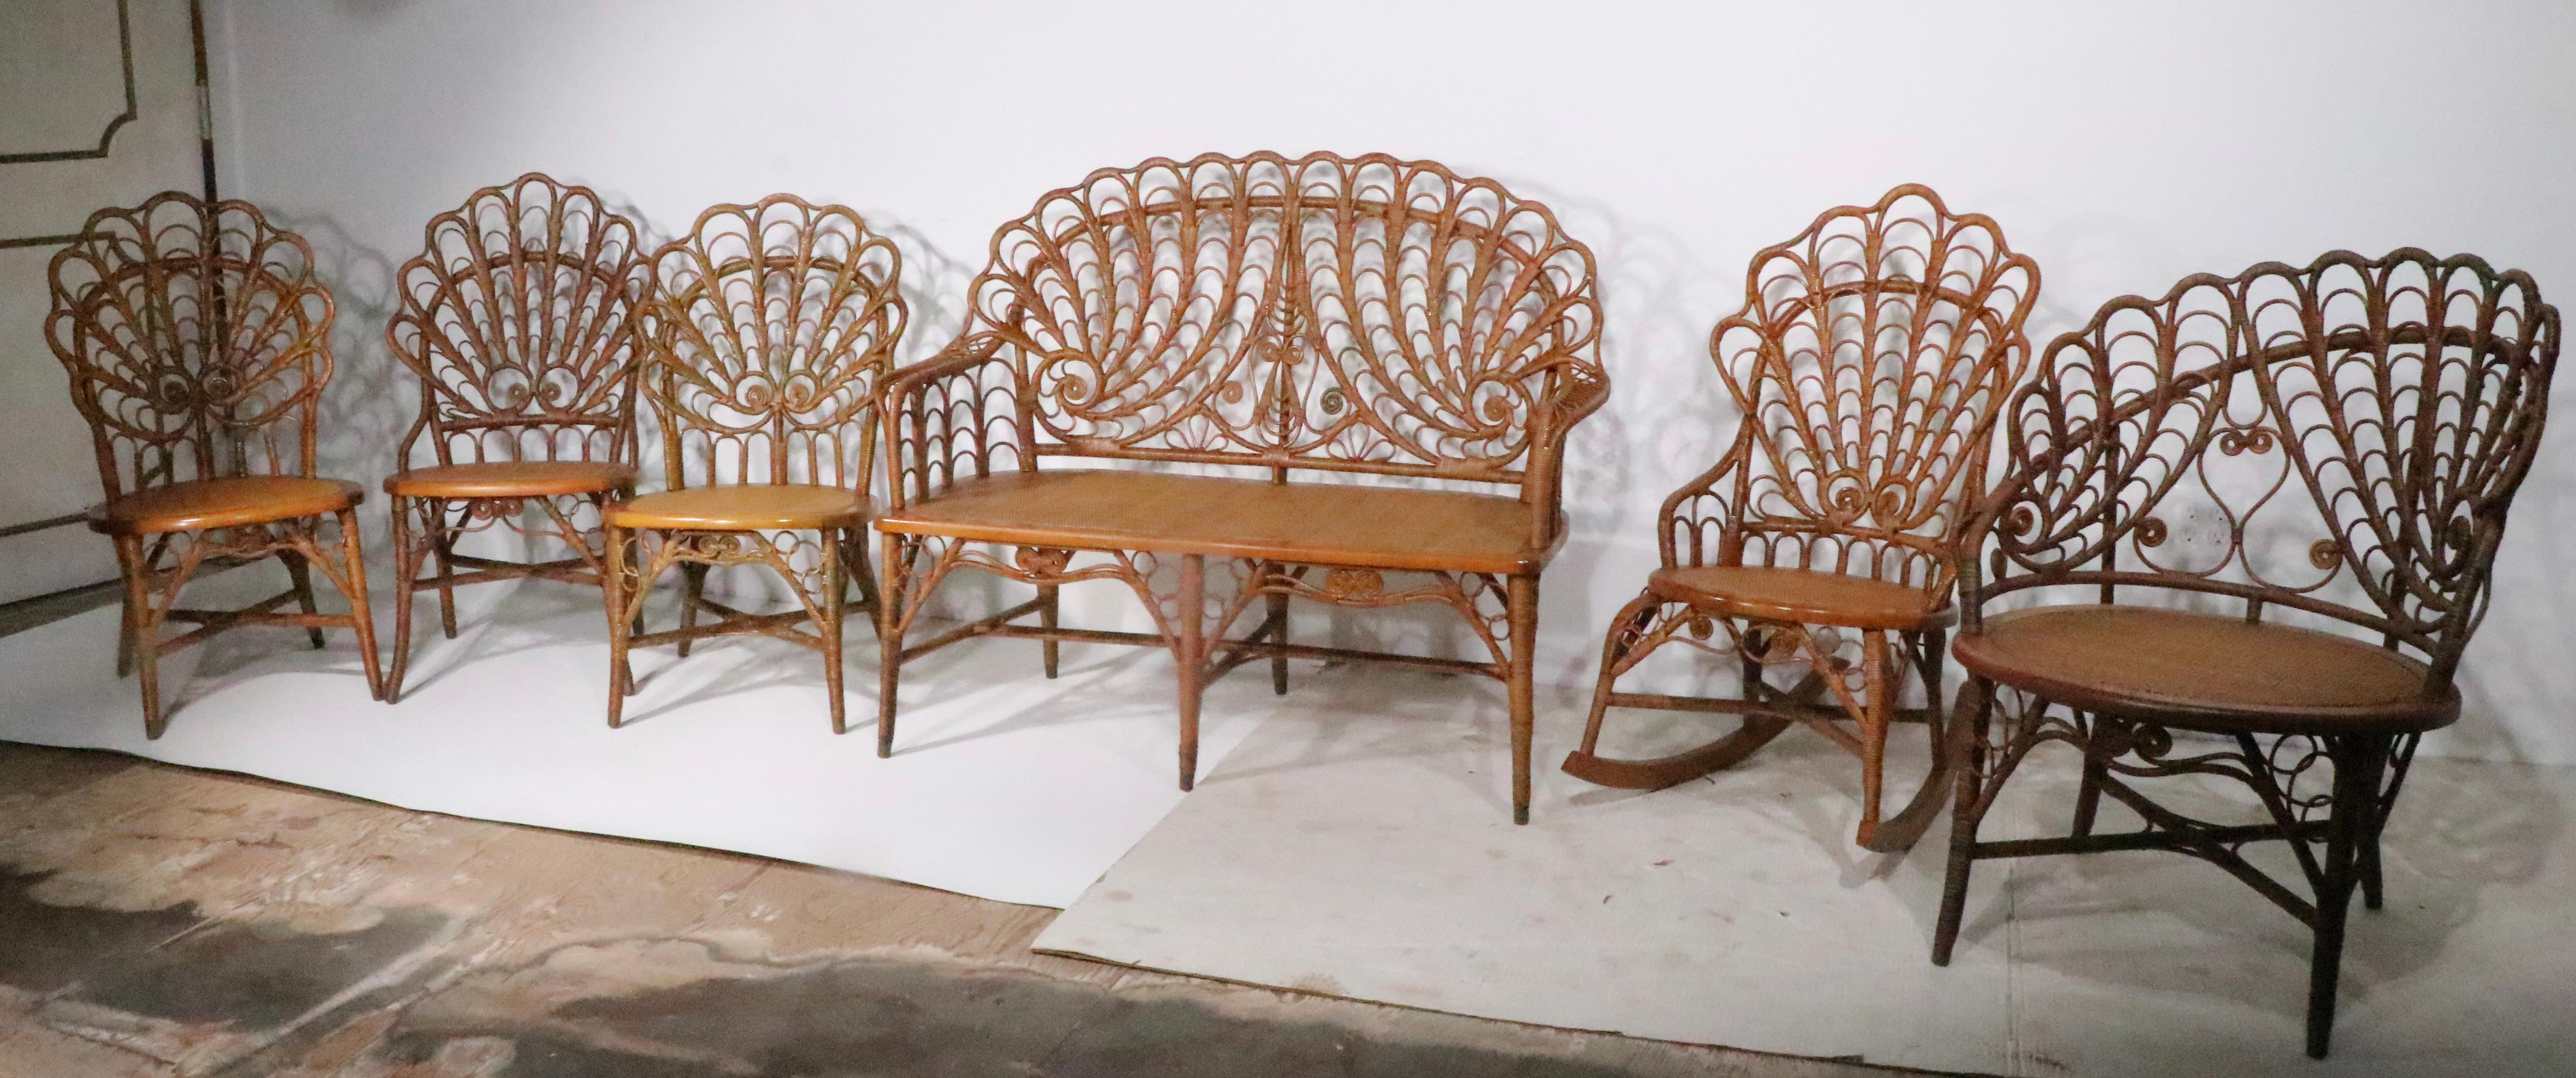 Incredible set of six antique wicker  pieces by Heywood Brothers, circa 1890's. This rare set consists of three side chairs, one rocking chair, one lounge chair and one loveseat settee sofa. The set is in exceptional original condition, showing